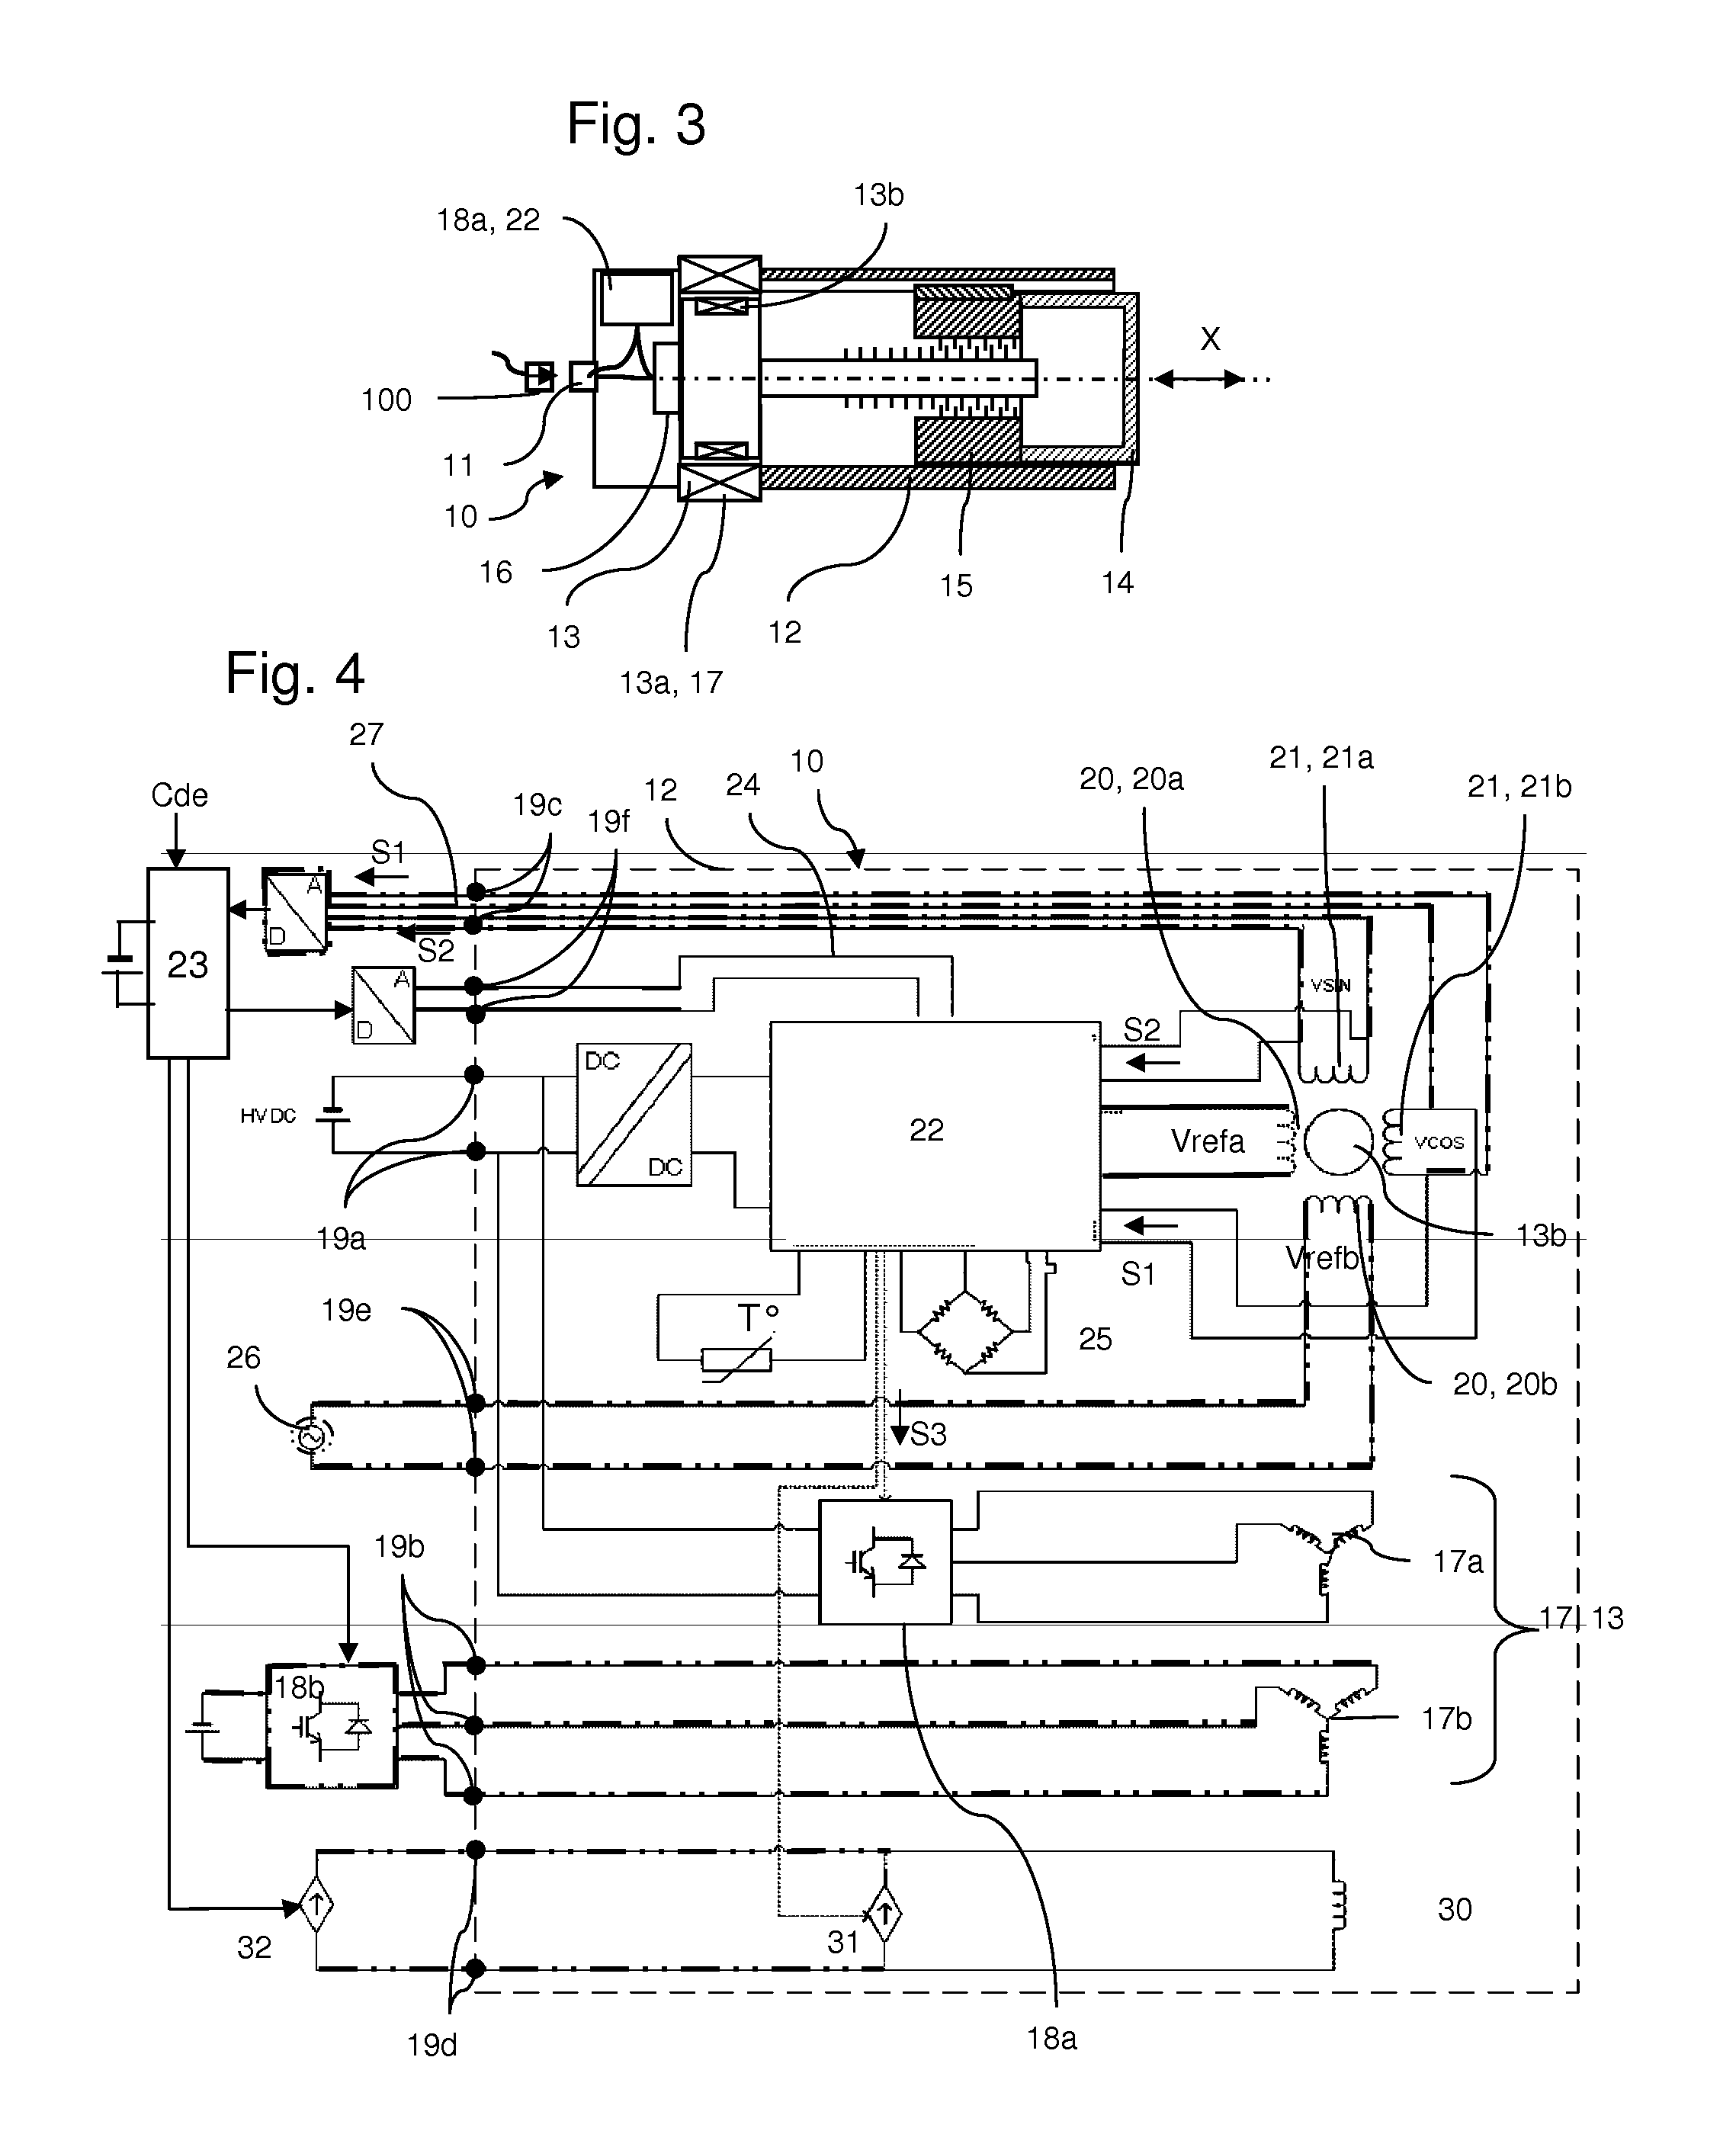 Electromechanical actuator with dual excitation